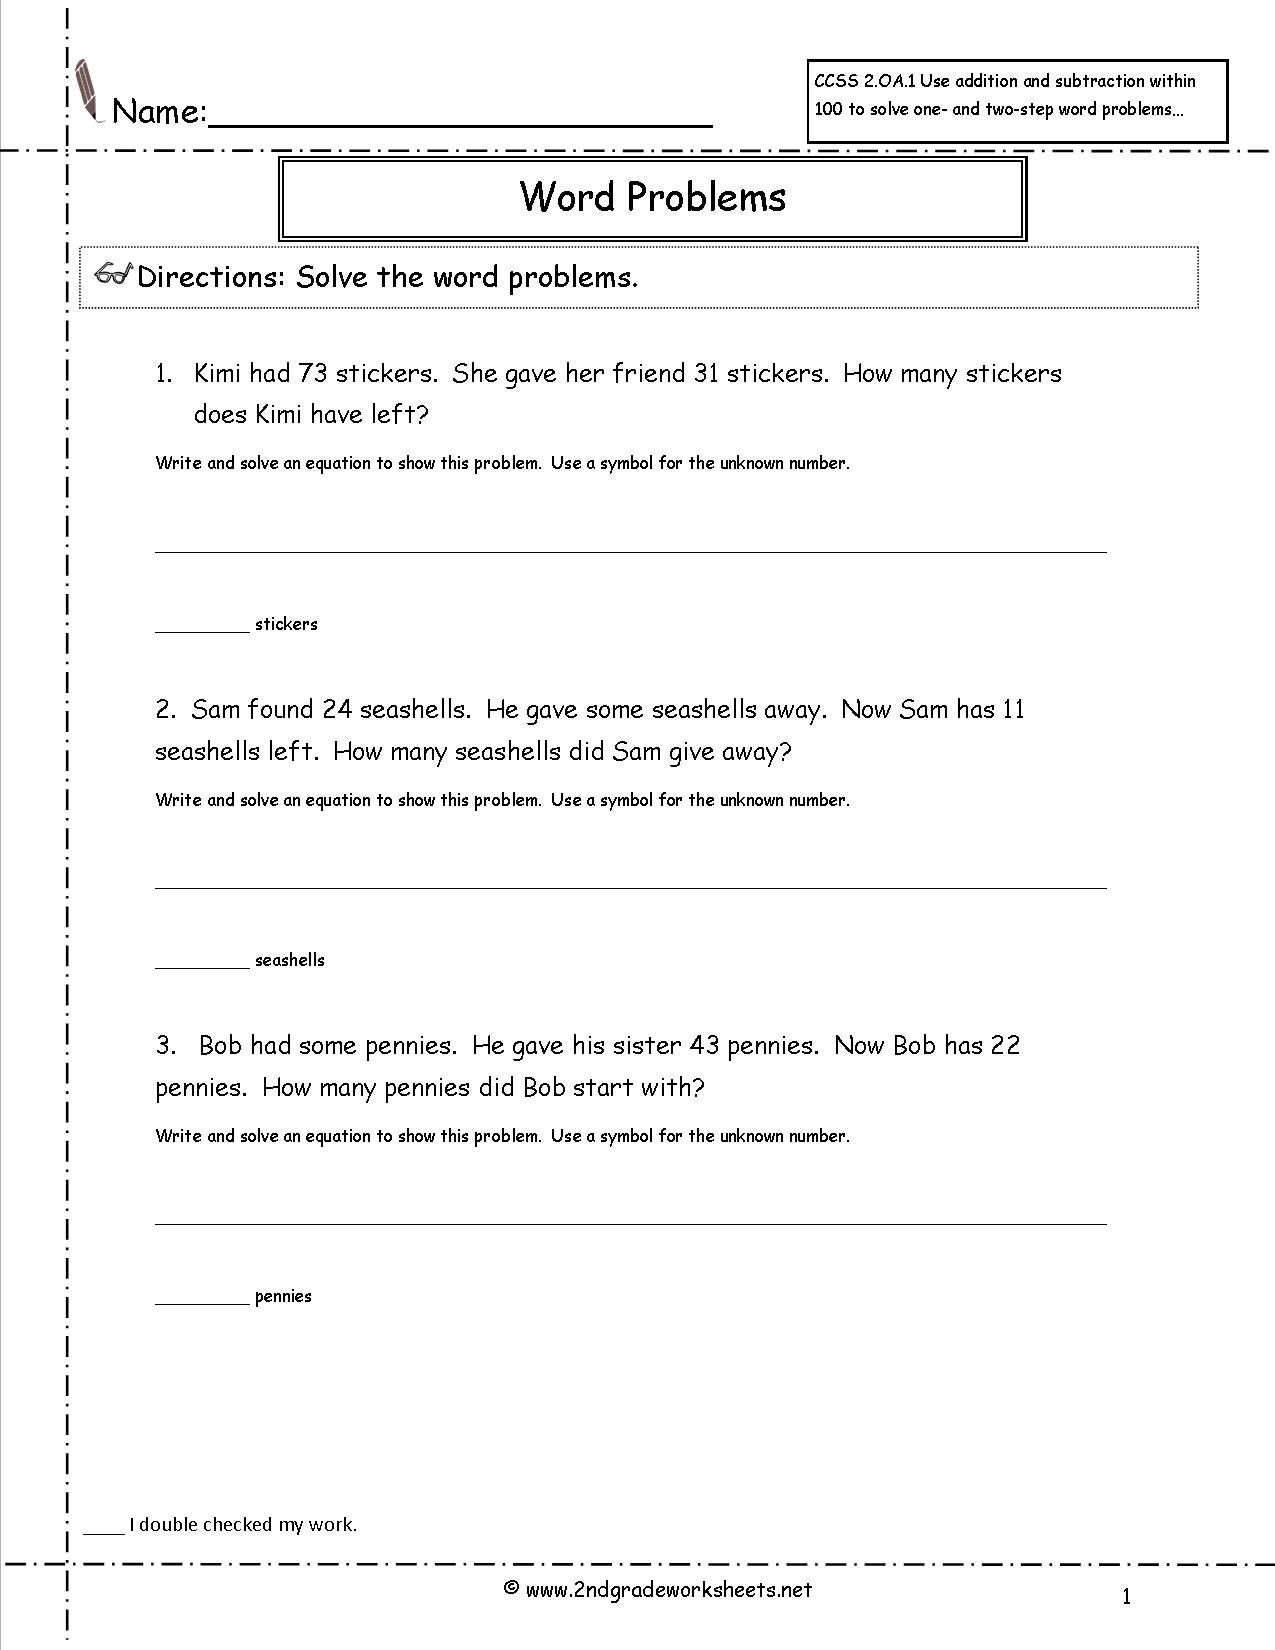 Order Of Operations Word Problems Worksheets With Answers